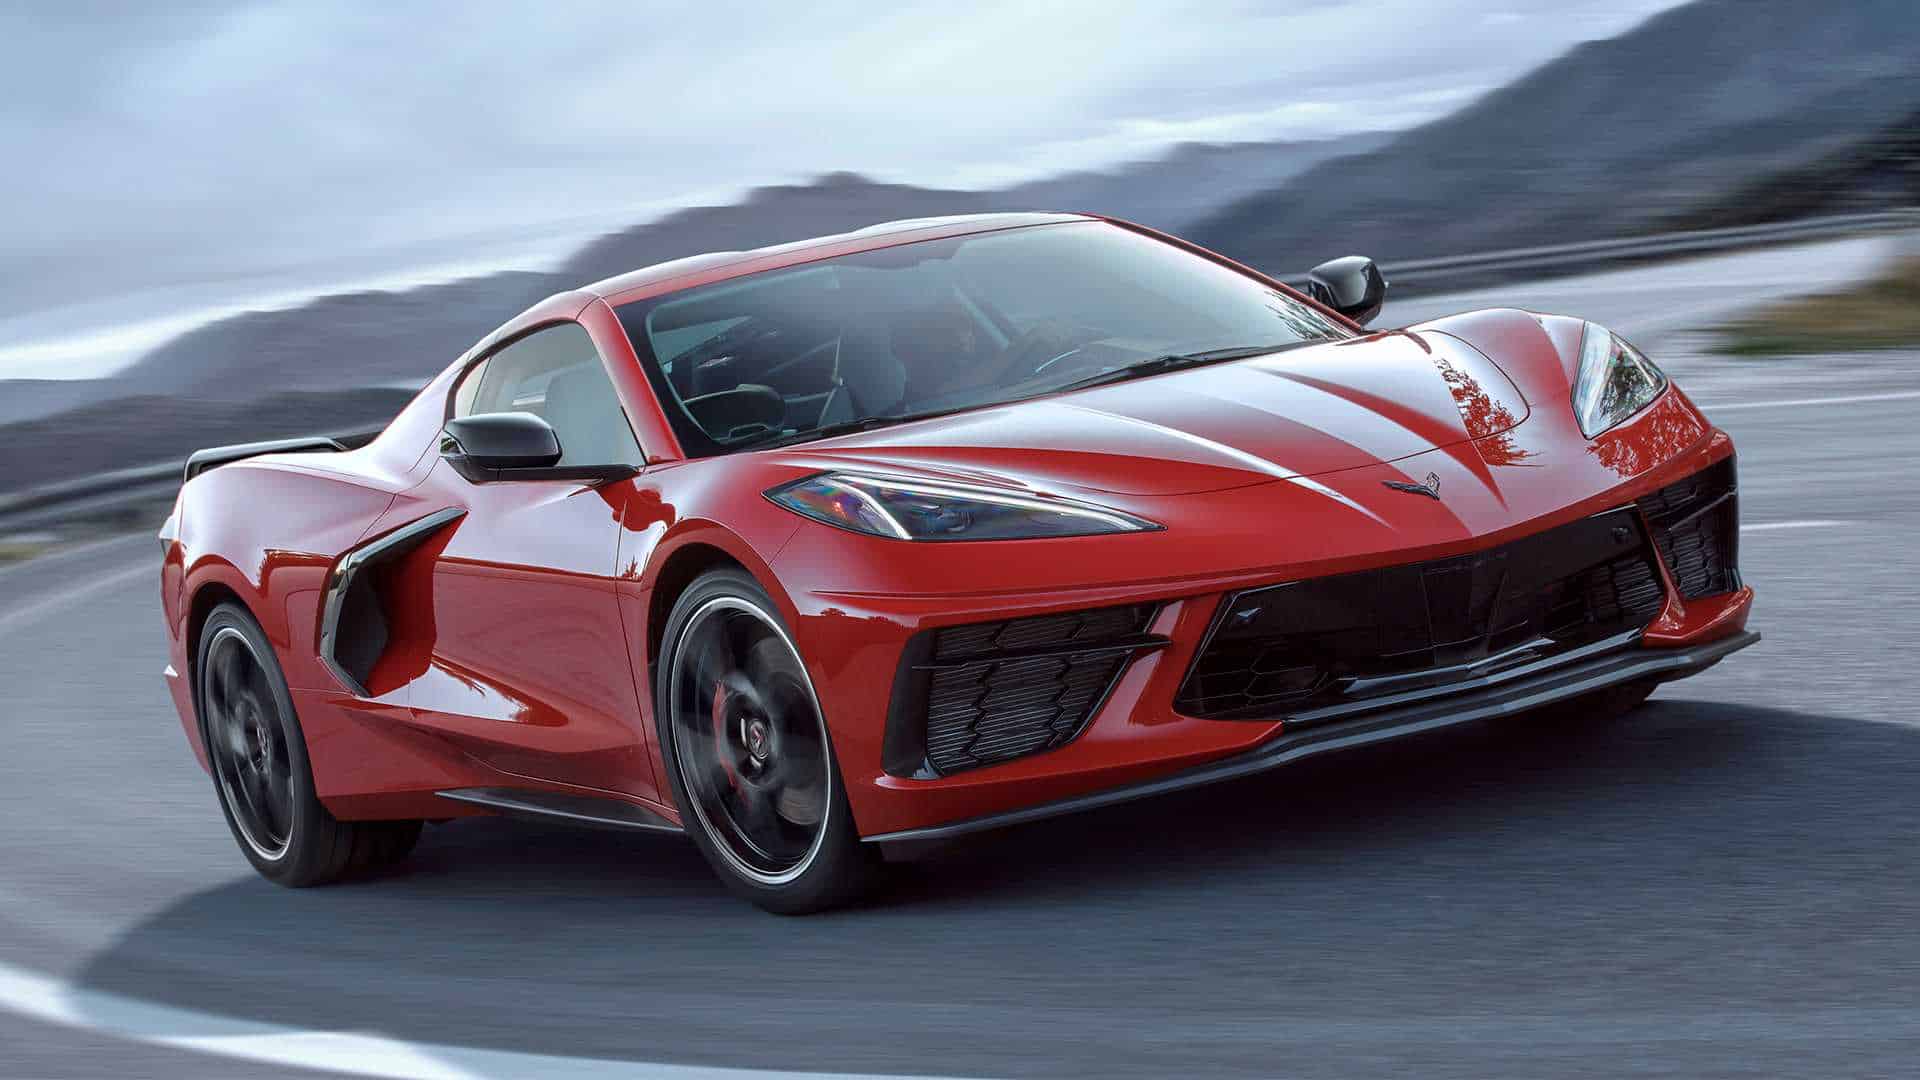 2020 Corvette C8 Price and Review